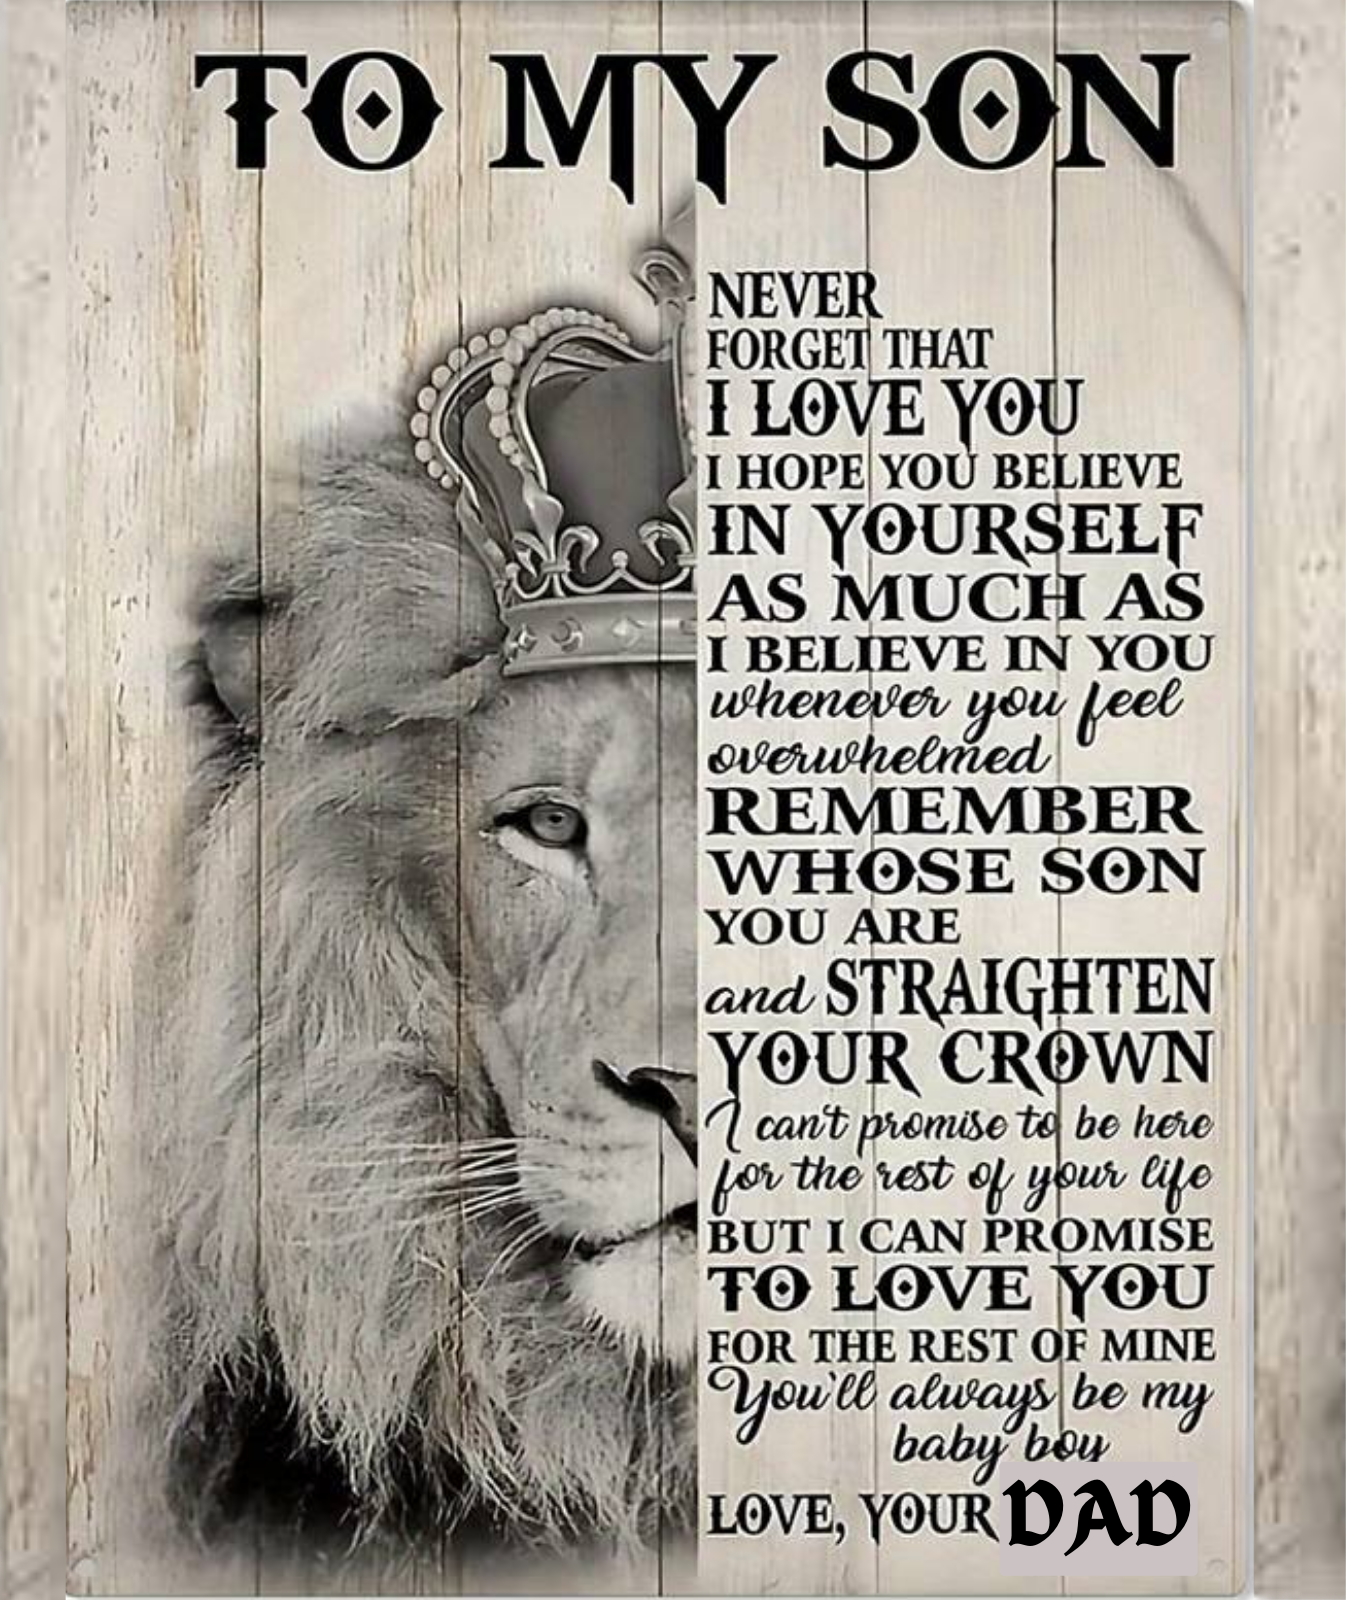 To My Son Never Forget King-DAD -Premium Mink Sherpa Blanket 50x60 SALE price $49.95 USD